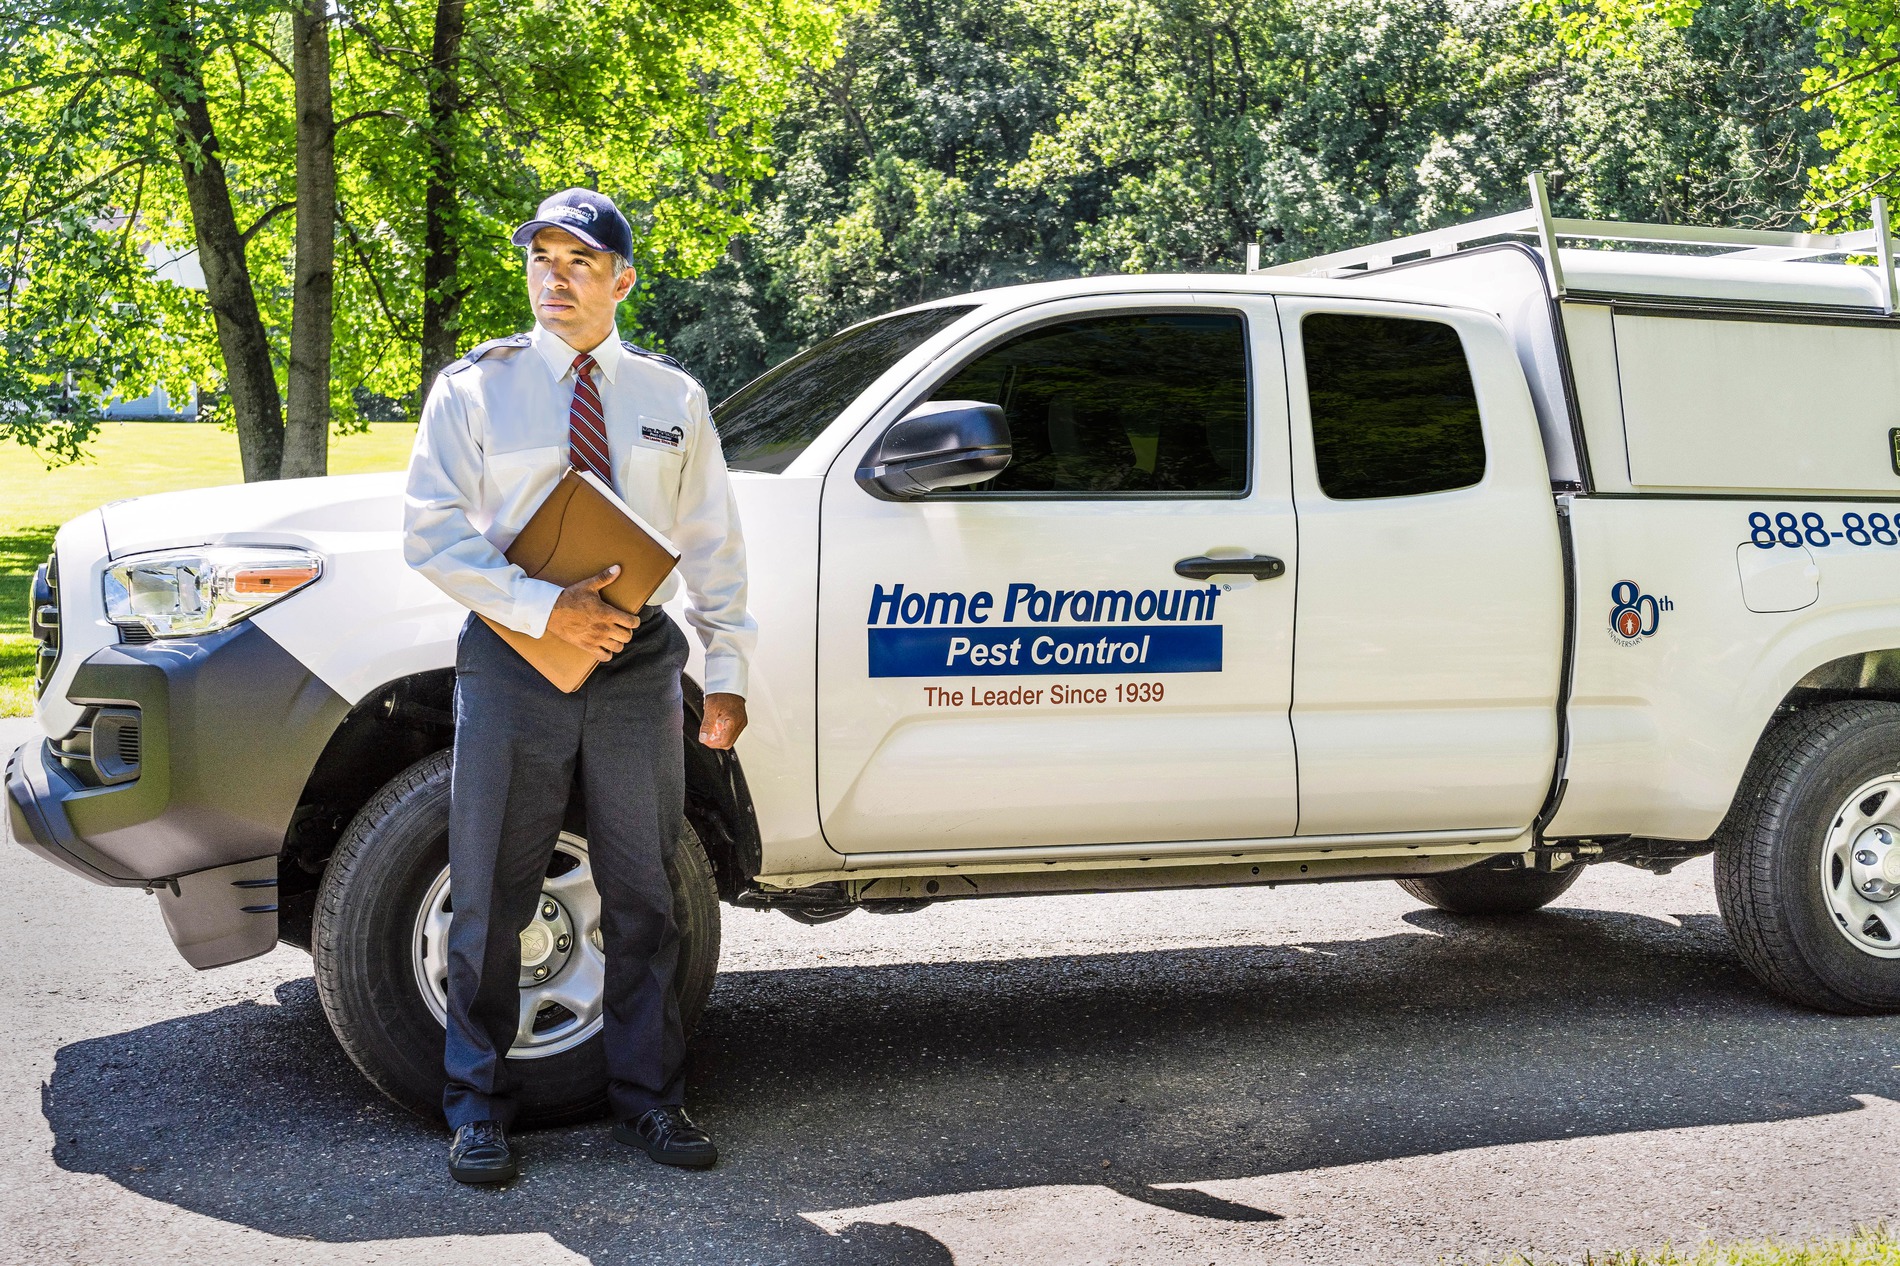 Home Paramount Pest Control Employee with a Service Truck